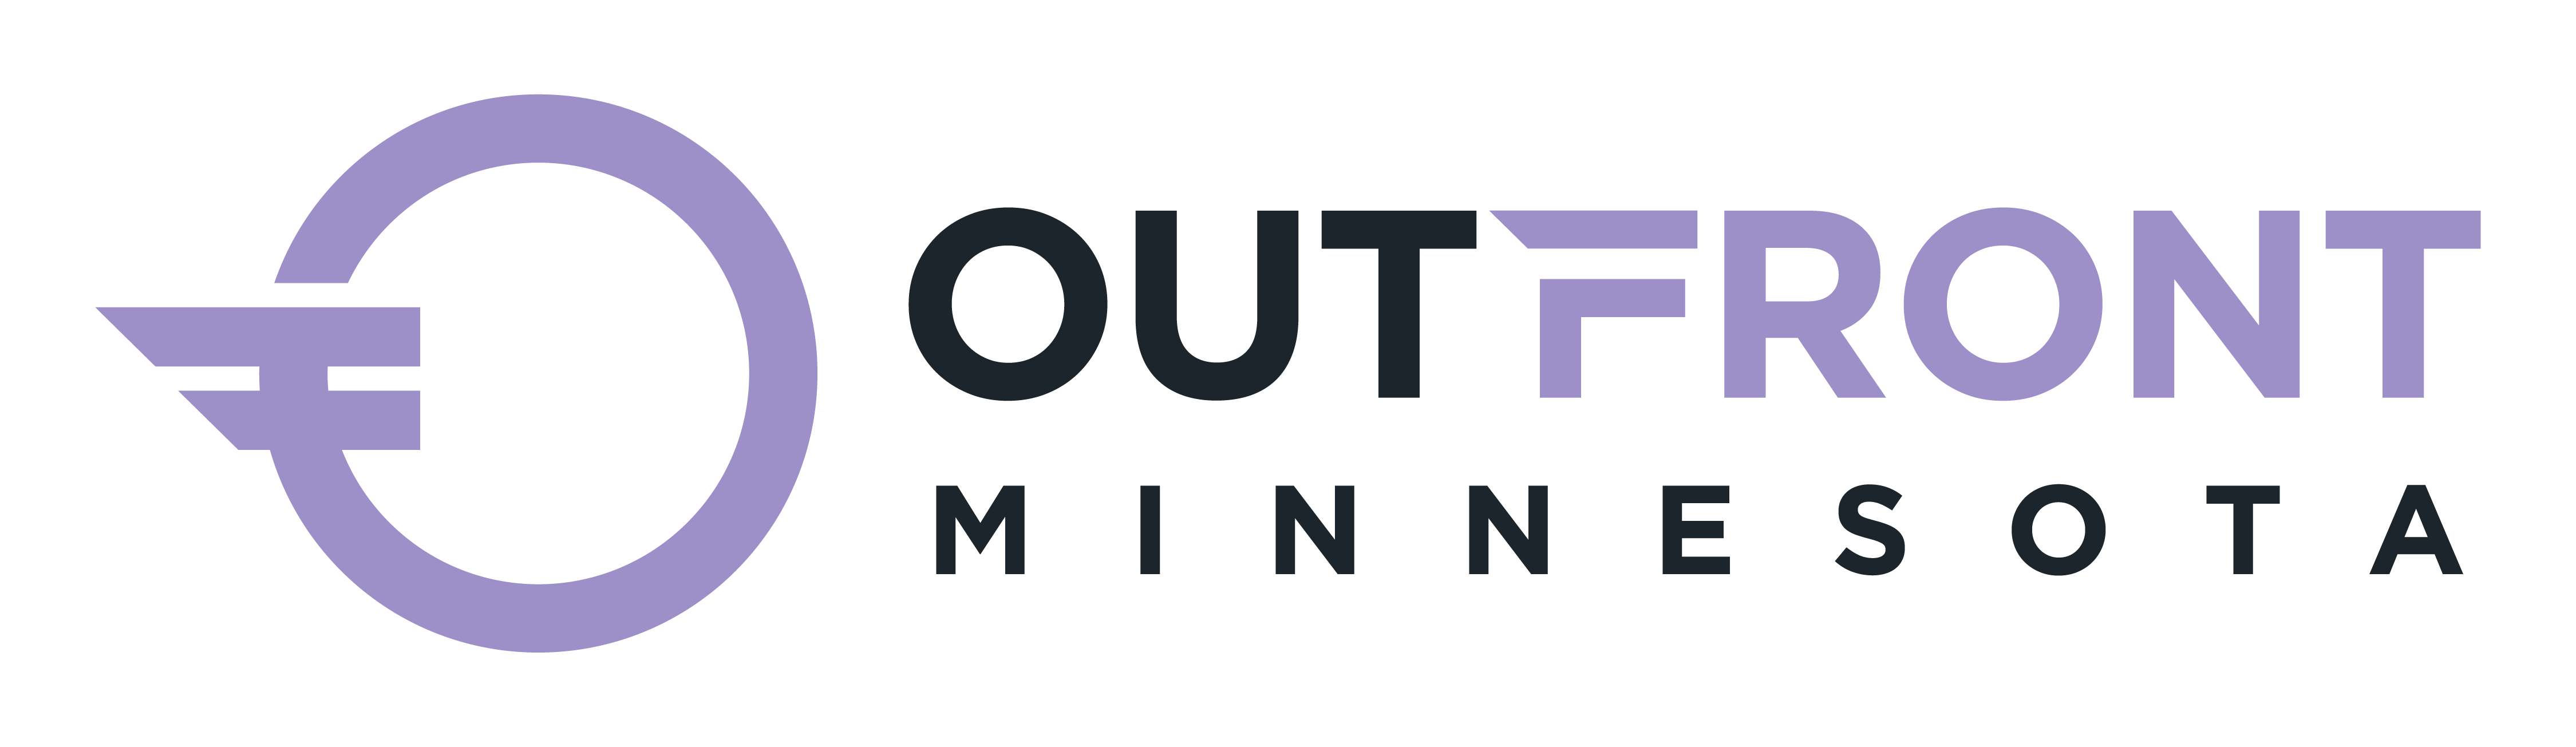 OutFront_Primary Logo Full Dark Color.png (4500×1305)